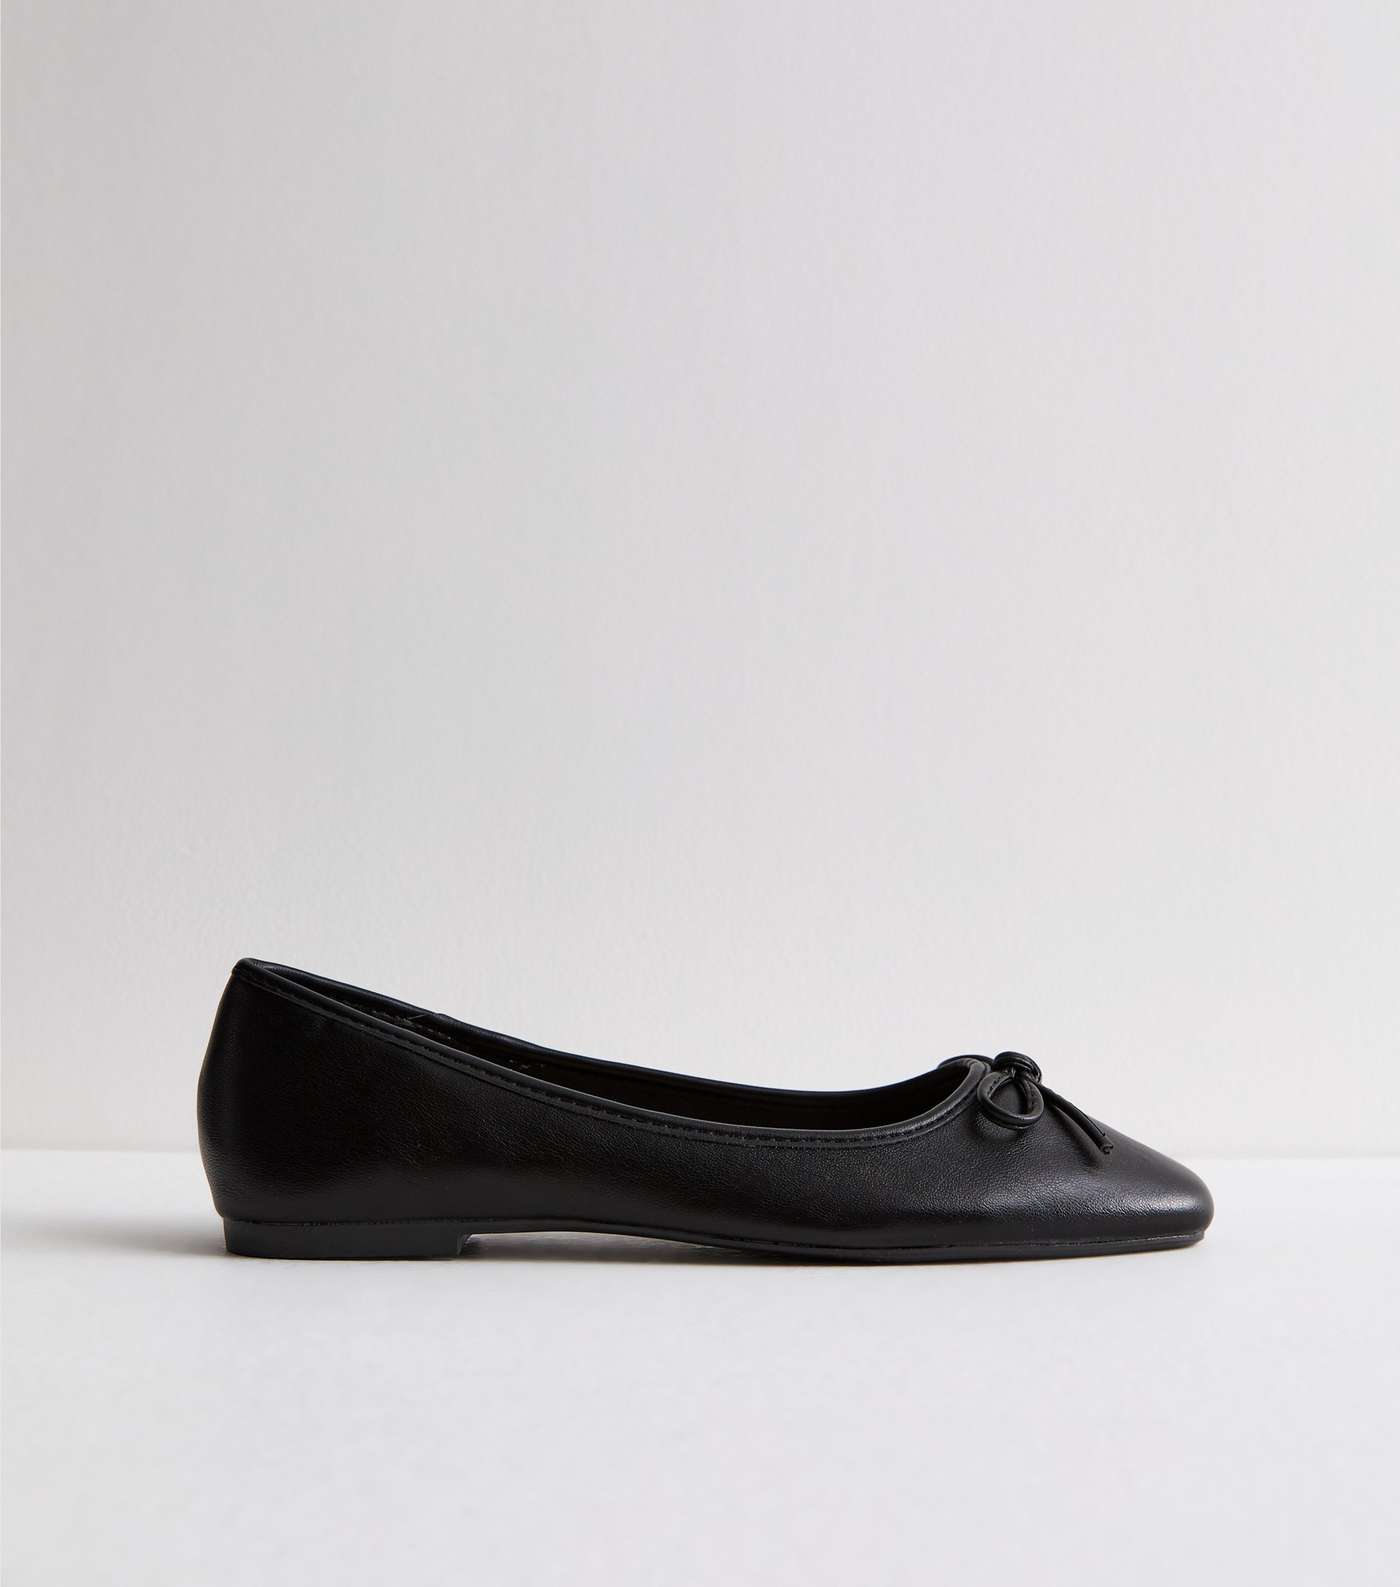 Truffle Black Leather-Look Bow Ballerina Pumps Image 5